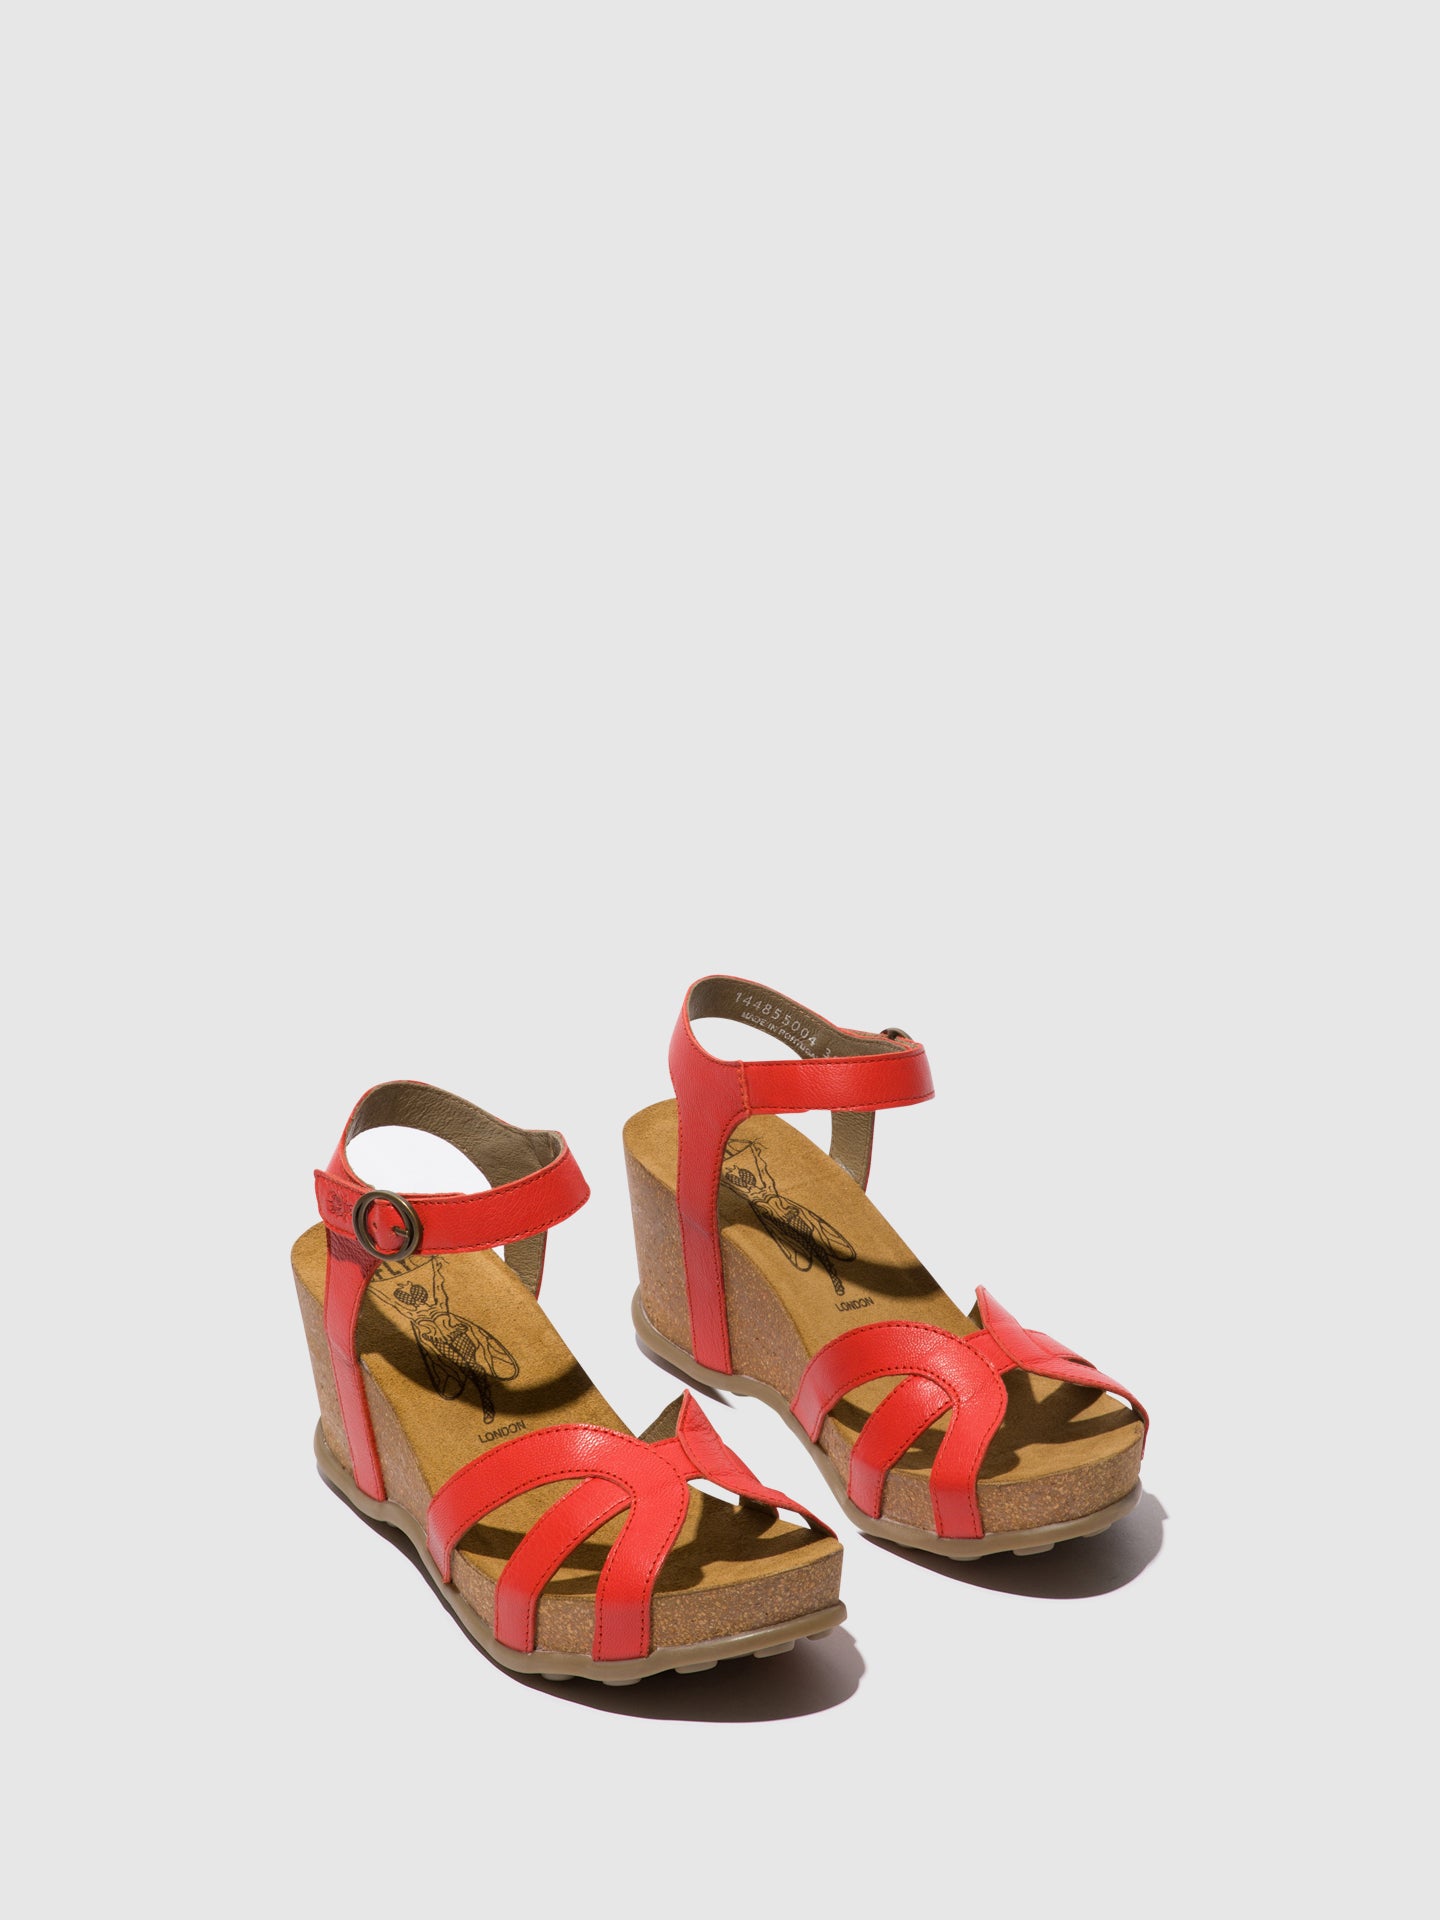 Fly London Ankle Strap Sandals GETA855FLY DEVIL RED